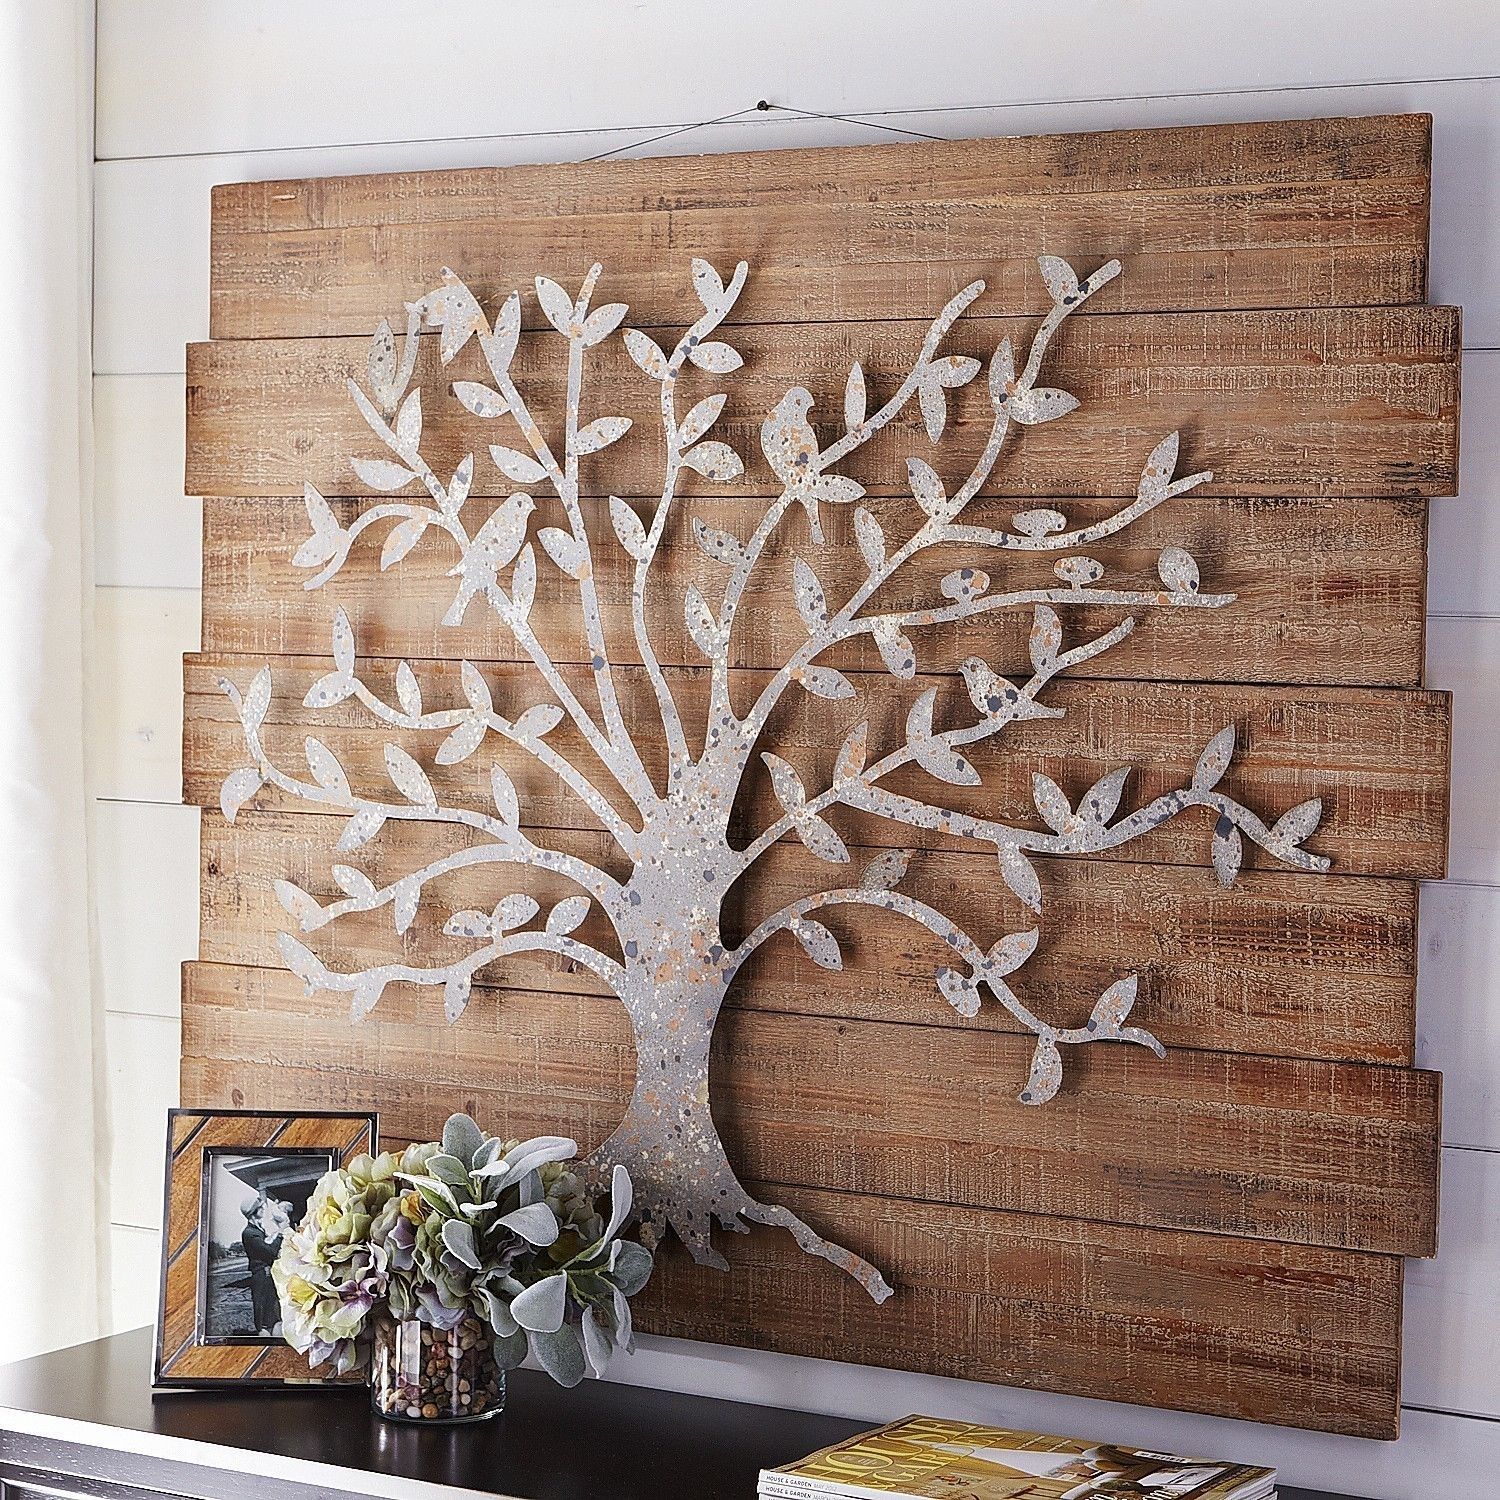 Timeless Tree Wall Decor | Pier 1 Imports … | Metal Work In 2018… Intended For Wall Art Metal (Photo 2 of 20)